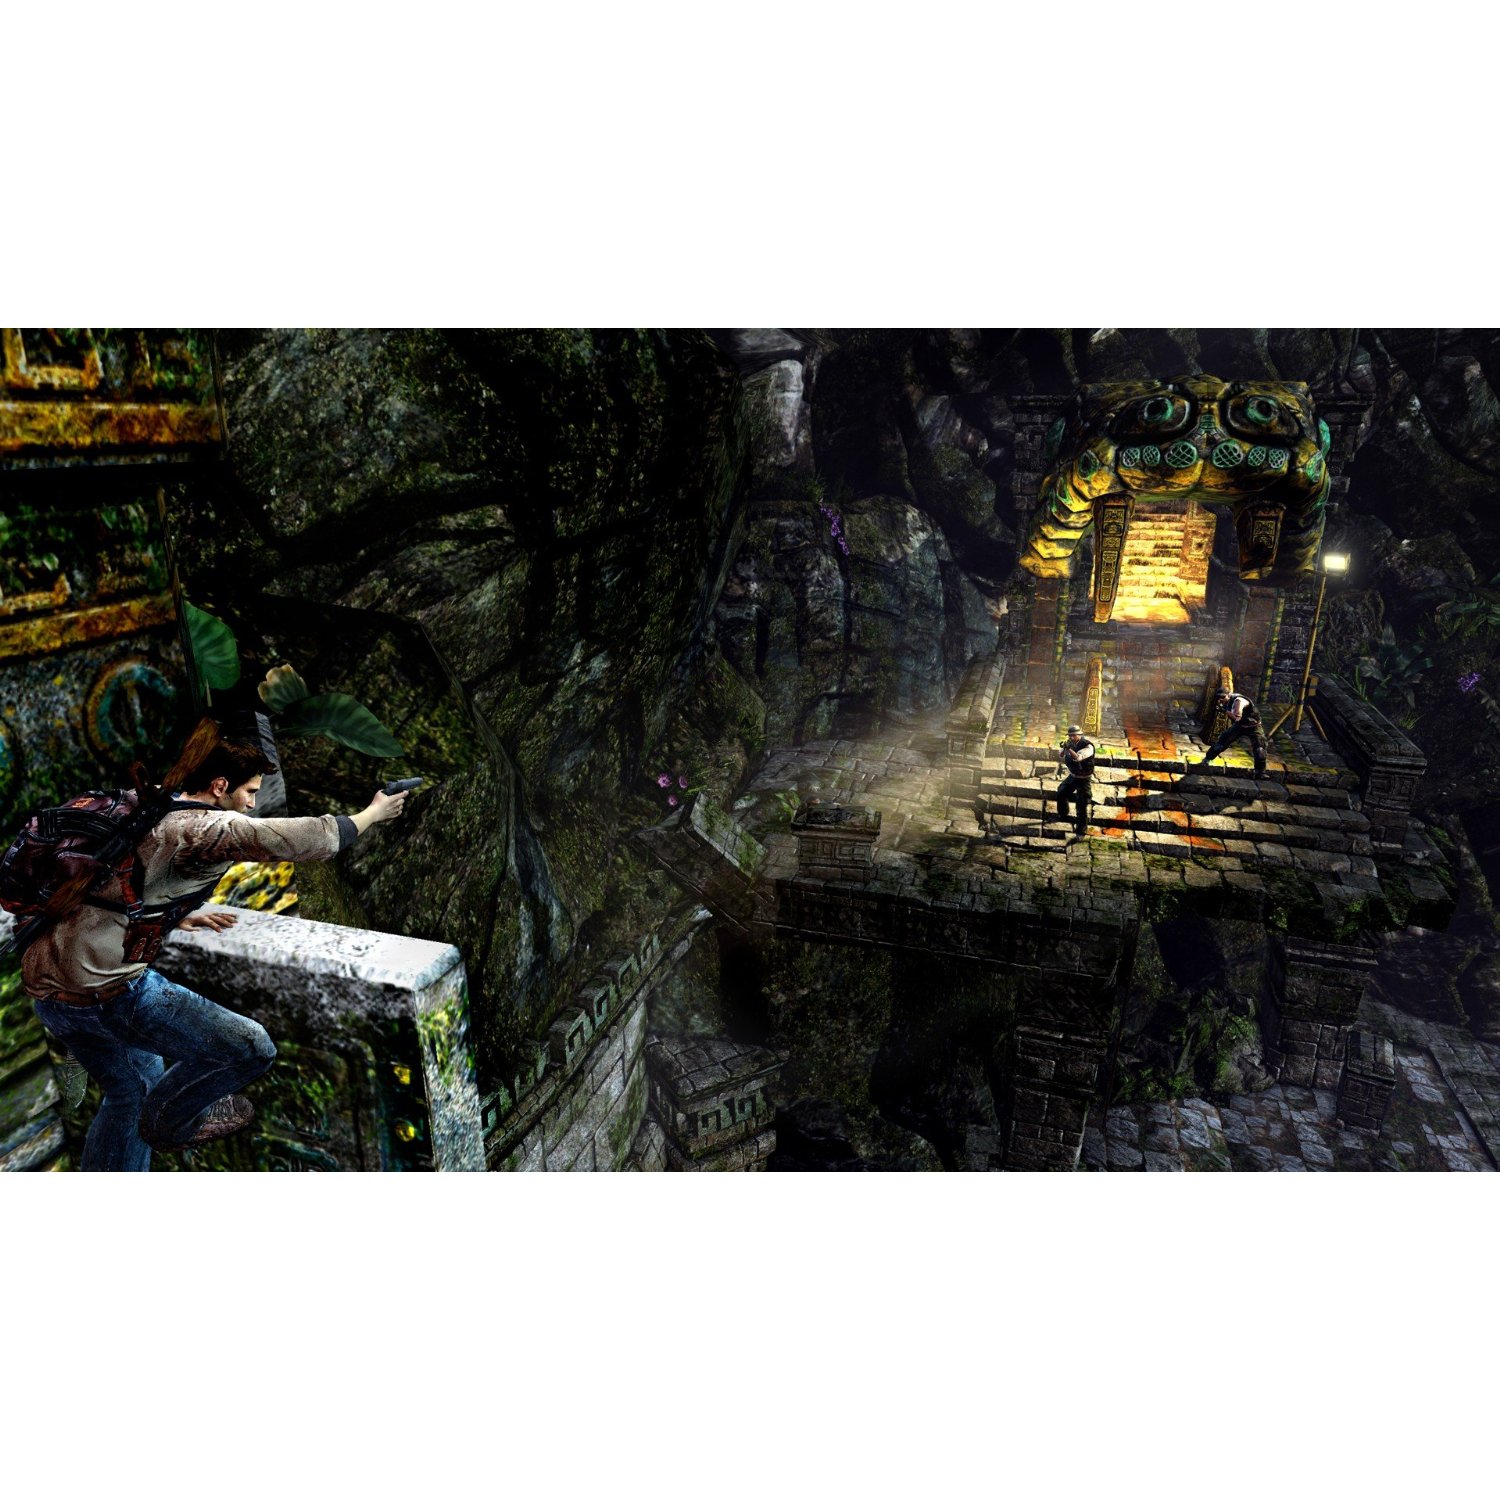 http://thetechjournal.com/wp-content/uploads/images/1112/1324125461-uncharted-golden-abyss-game-for-preorder-2.jpg